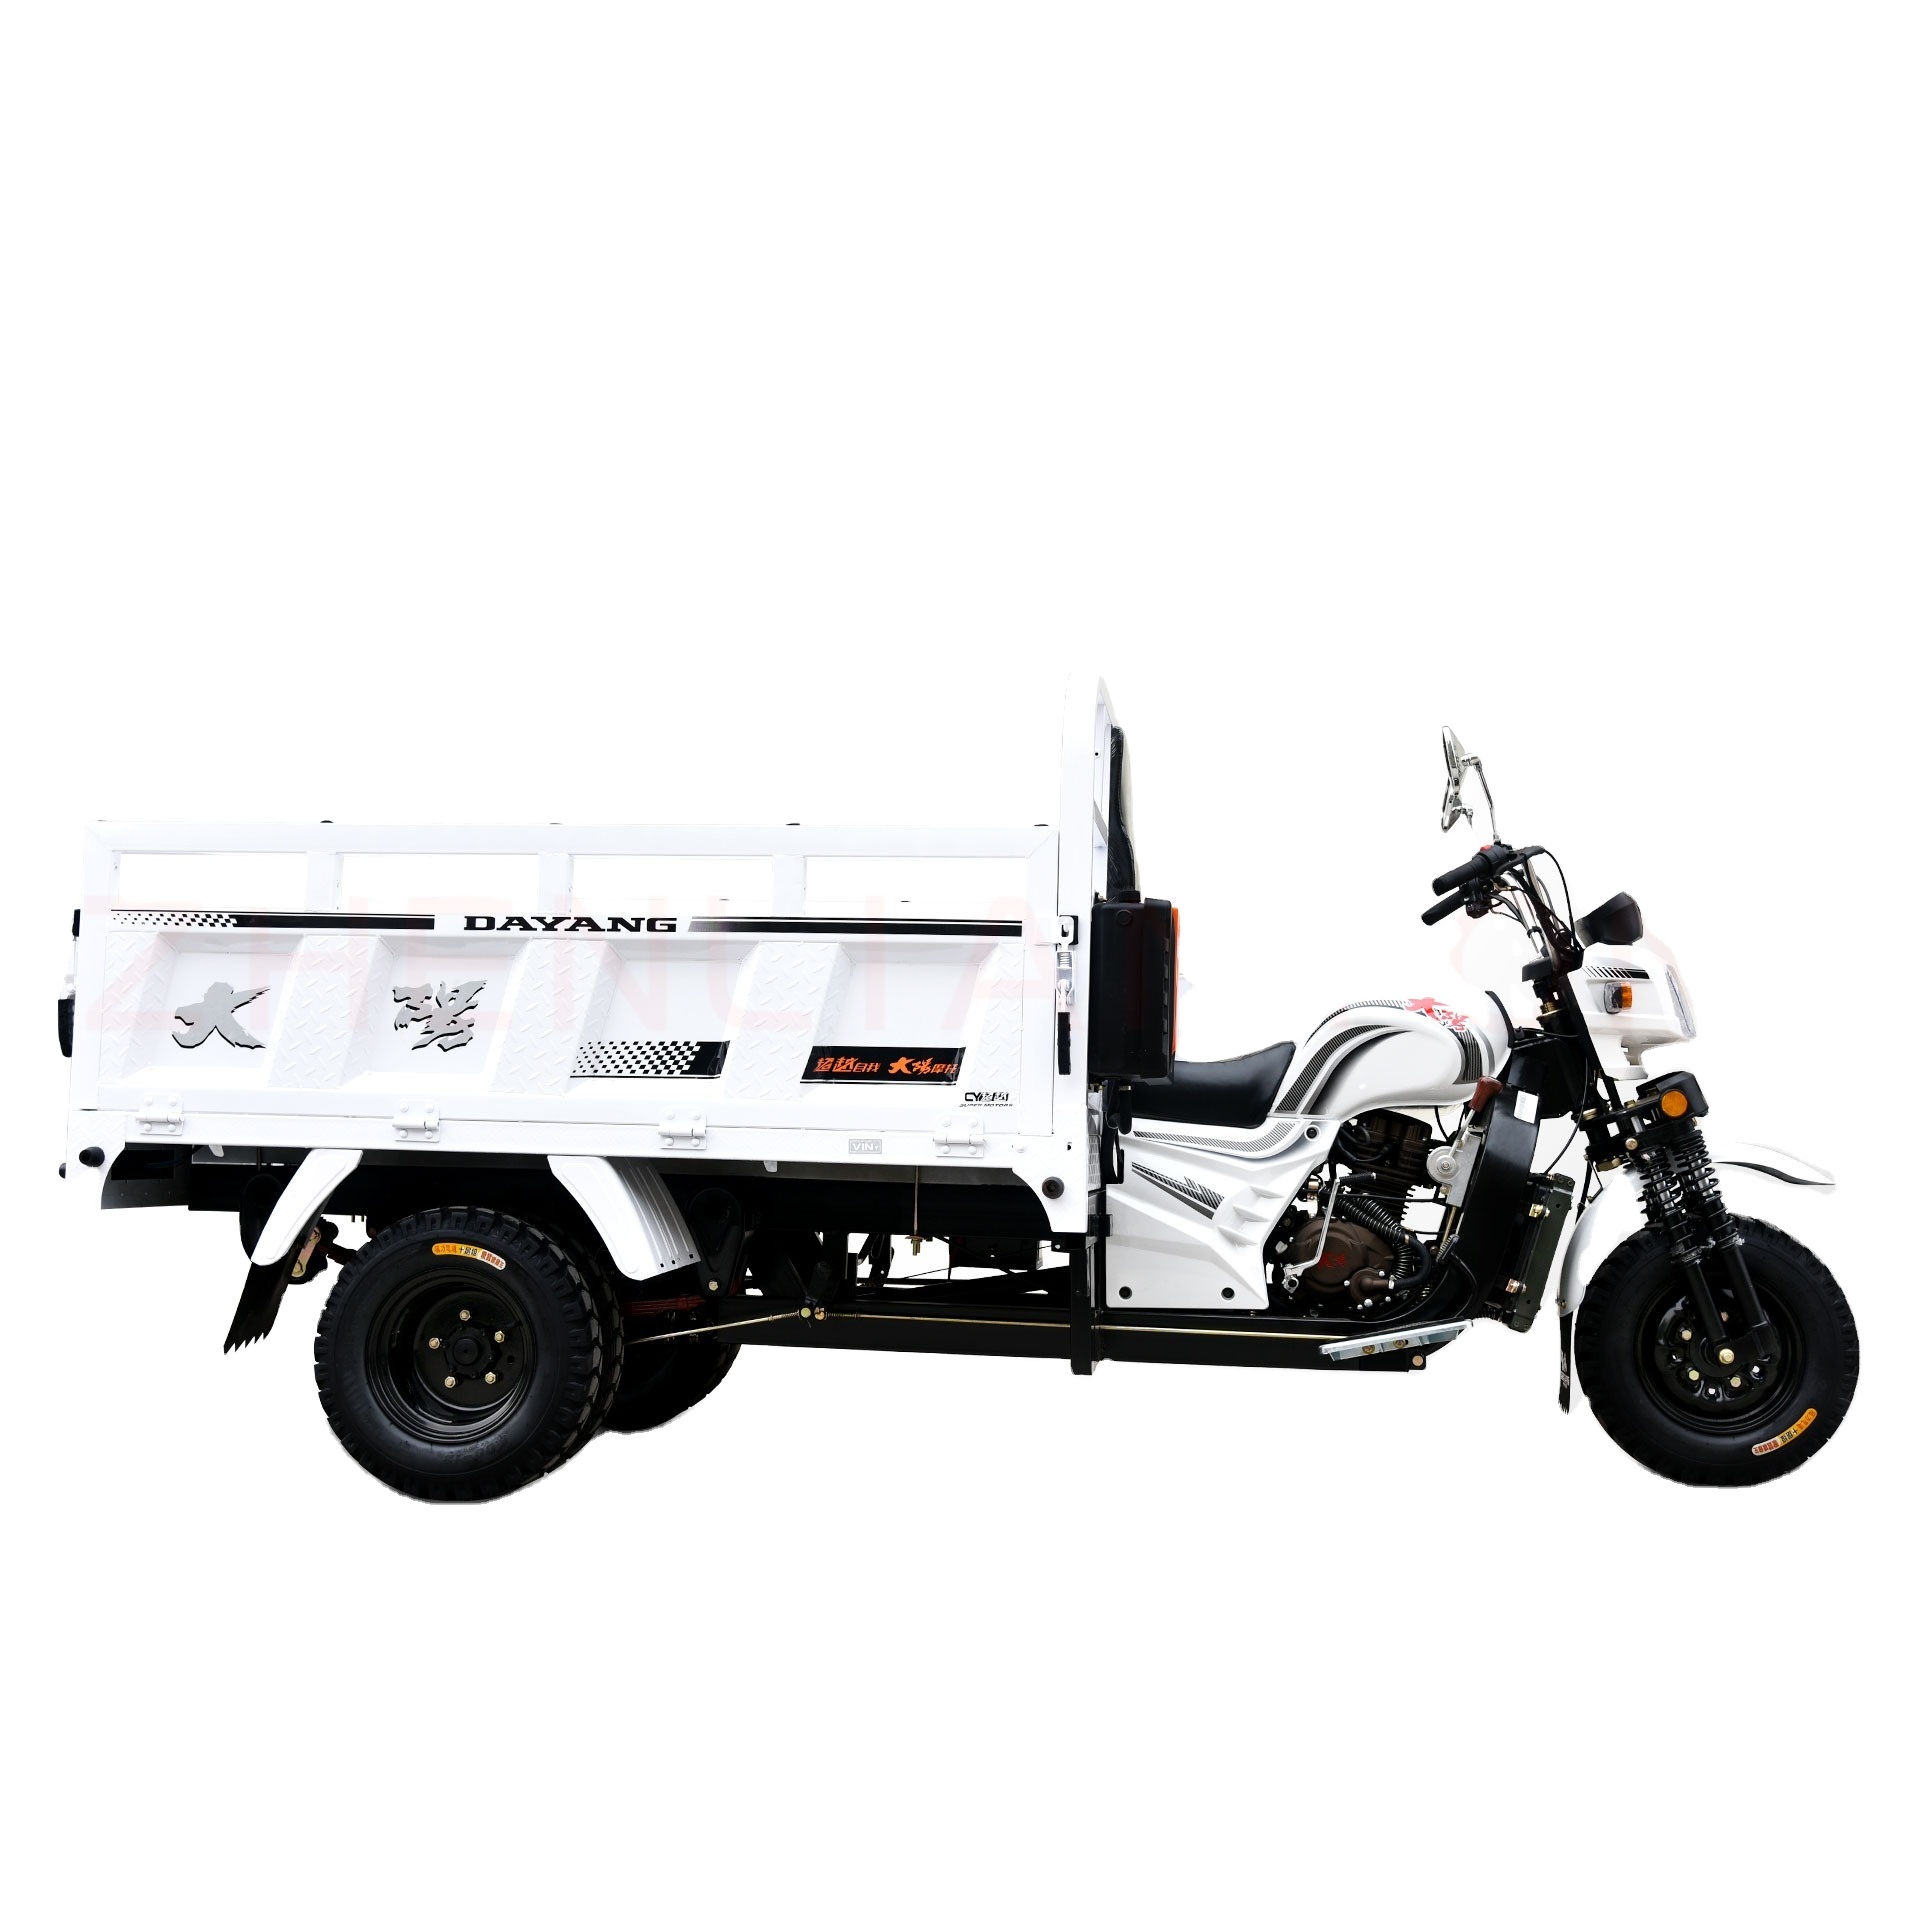 New styleused elderly mobility scooter fuel gasoline zongshen engine ethiopia tricycles motor price